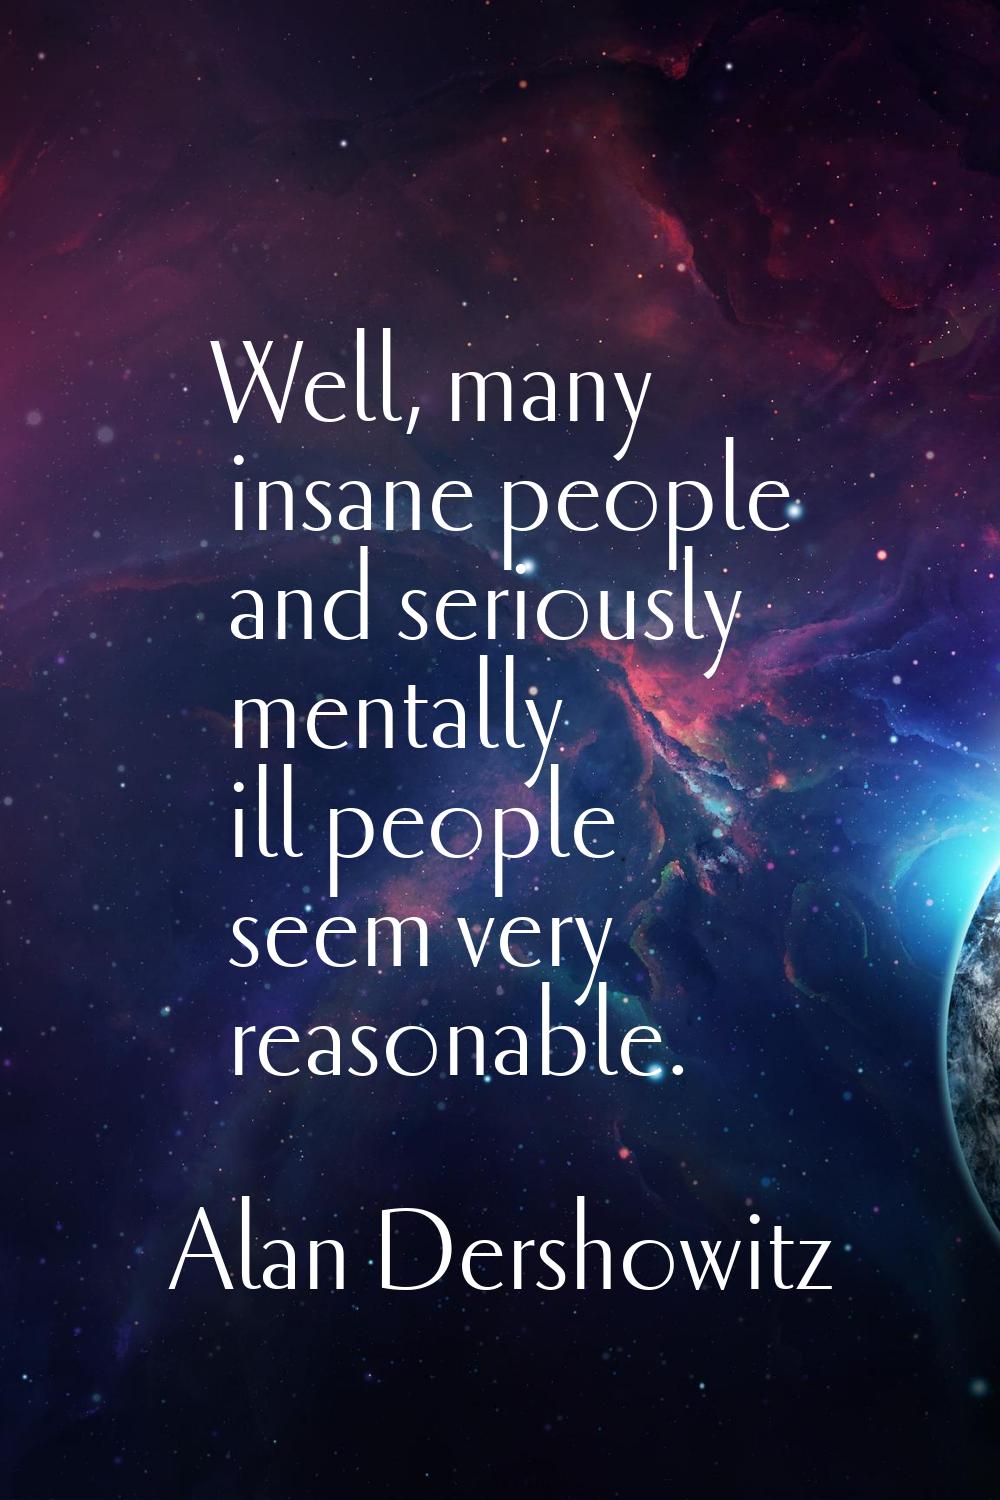 Well, many insane people and seriously mentally ill people seem very reasonable.